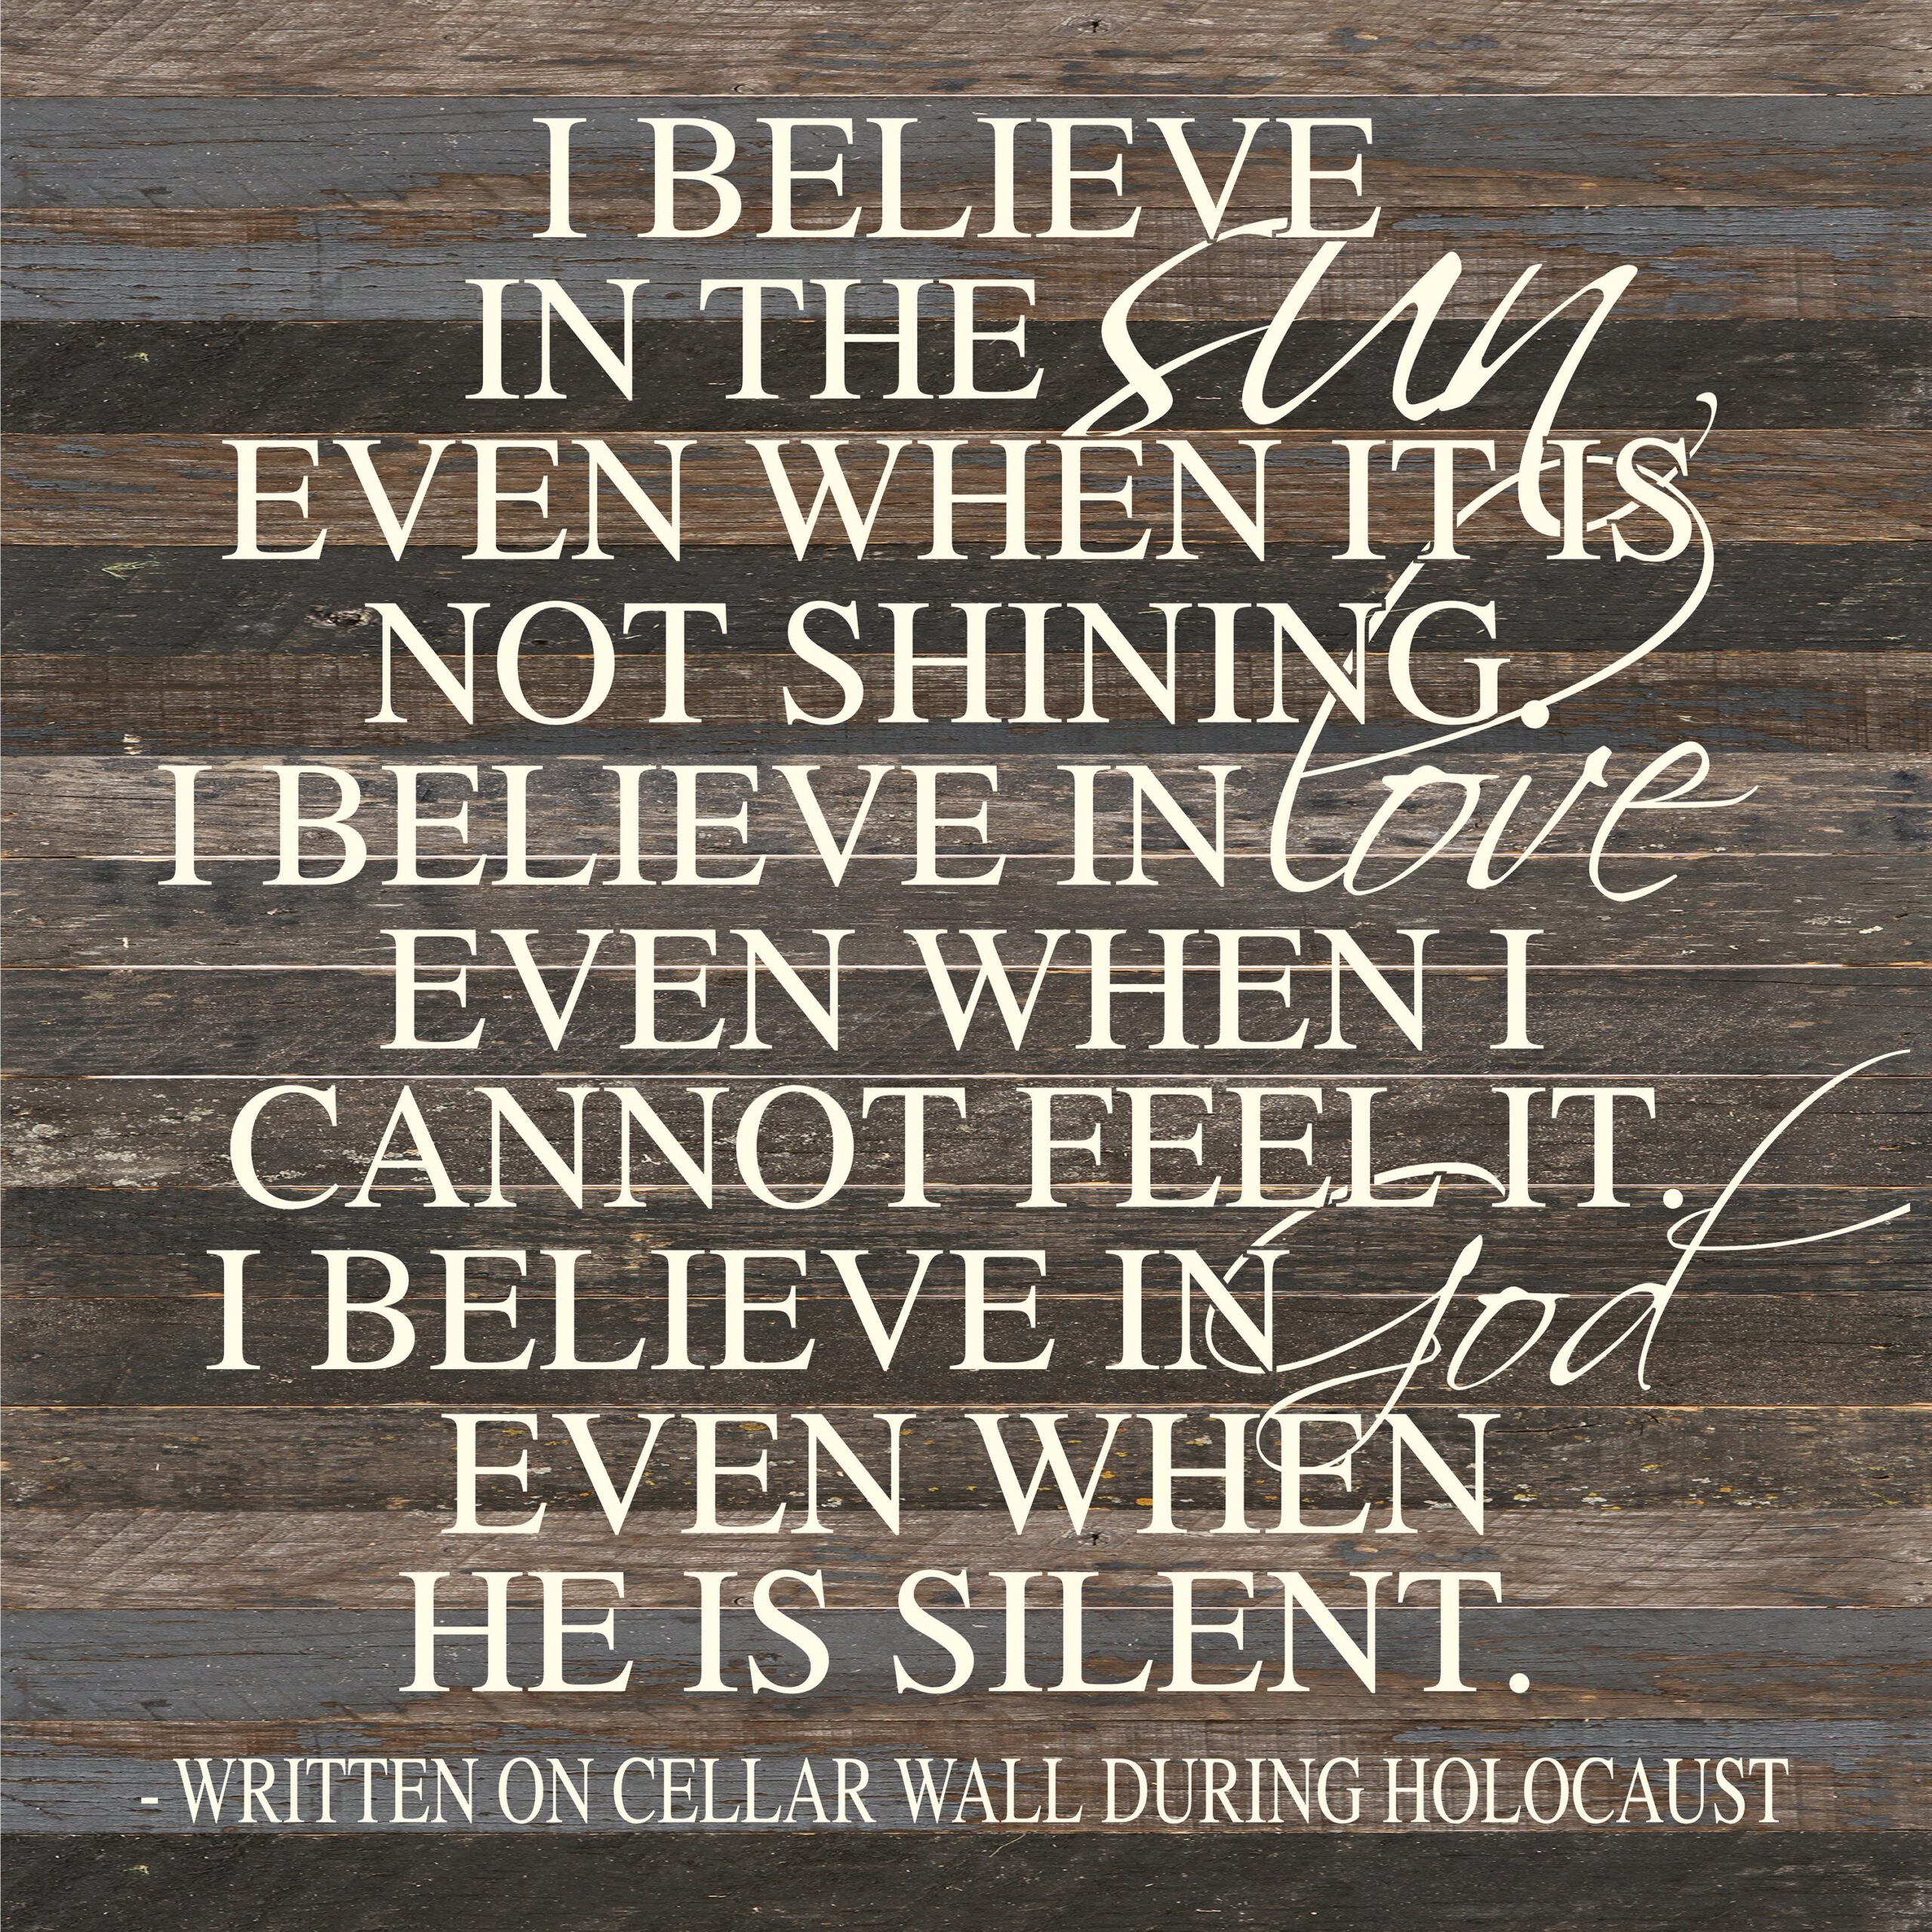 I believe in the sun even when it is not shining. I believe in love even when I cannot feel it. I believe in God even when He is silent. (Written on a cellar wall during Holocaust) / 28"x28" Reclaimed Wood Sign